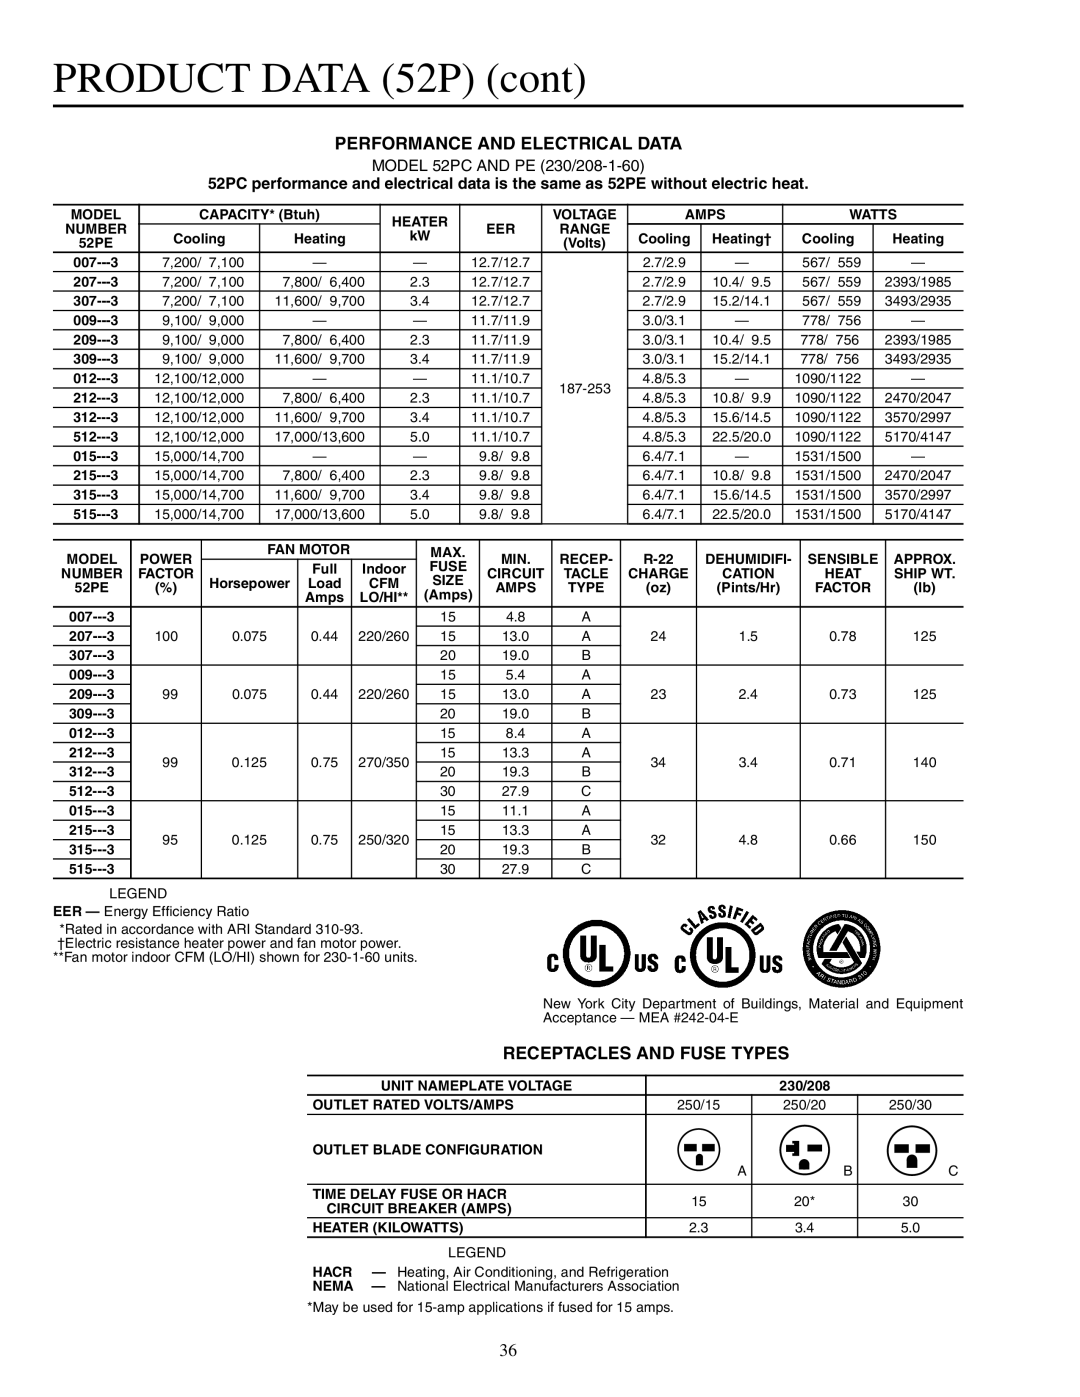 Carrier 592-085 warranty PRODUCT DATA 52P cont, Performance And Electrical Data, Receptacles And Fuse Types 